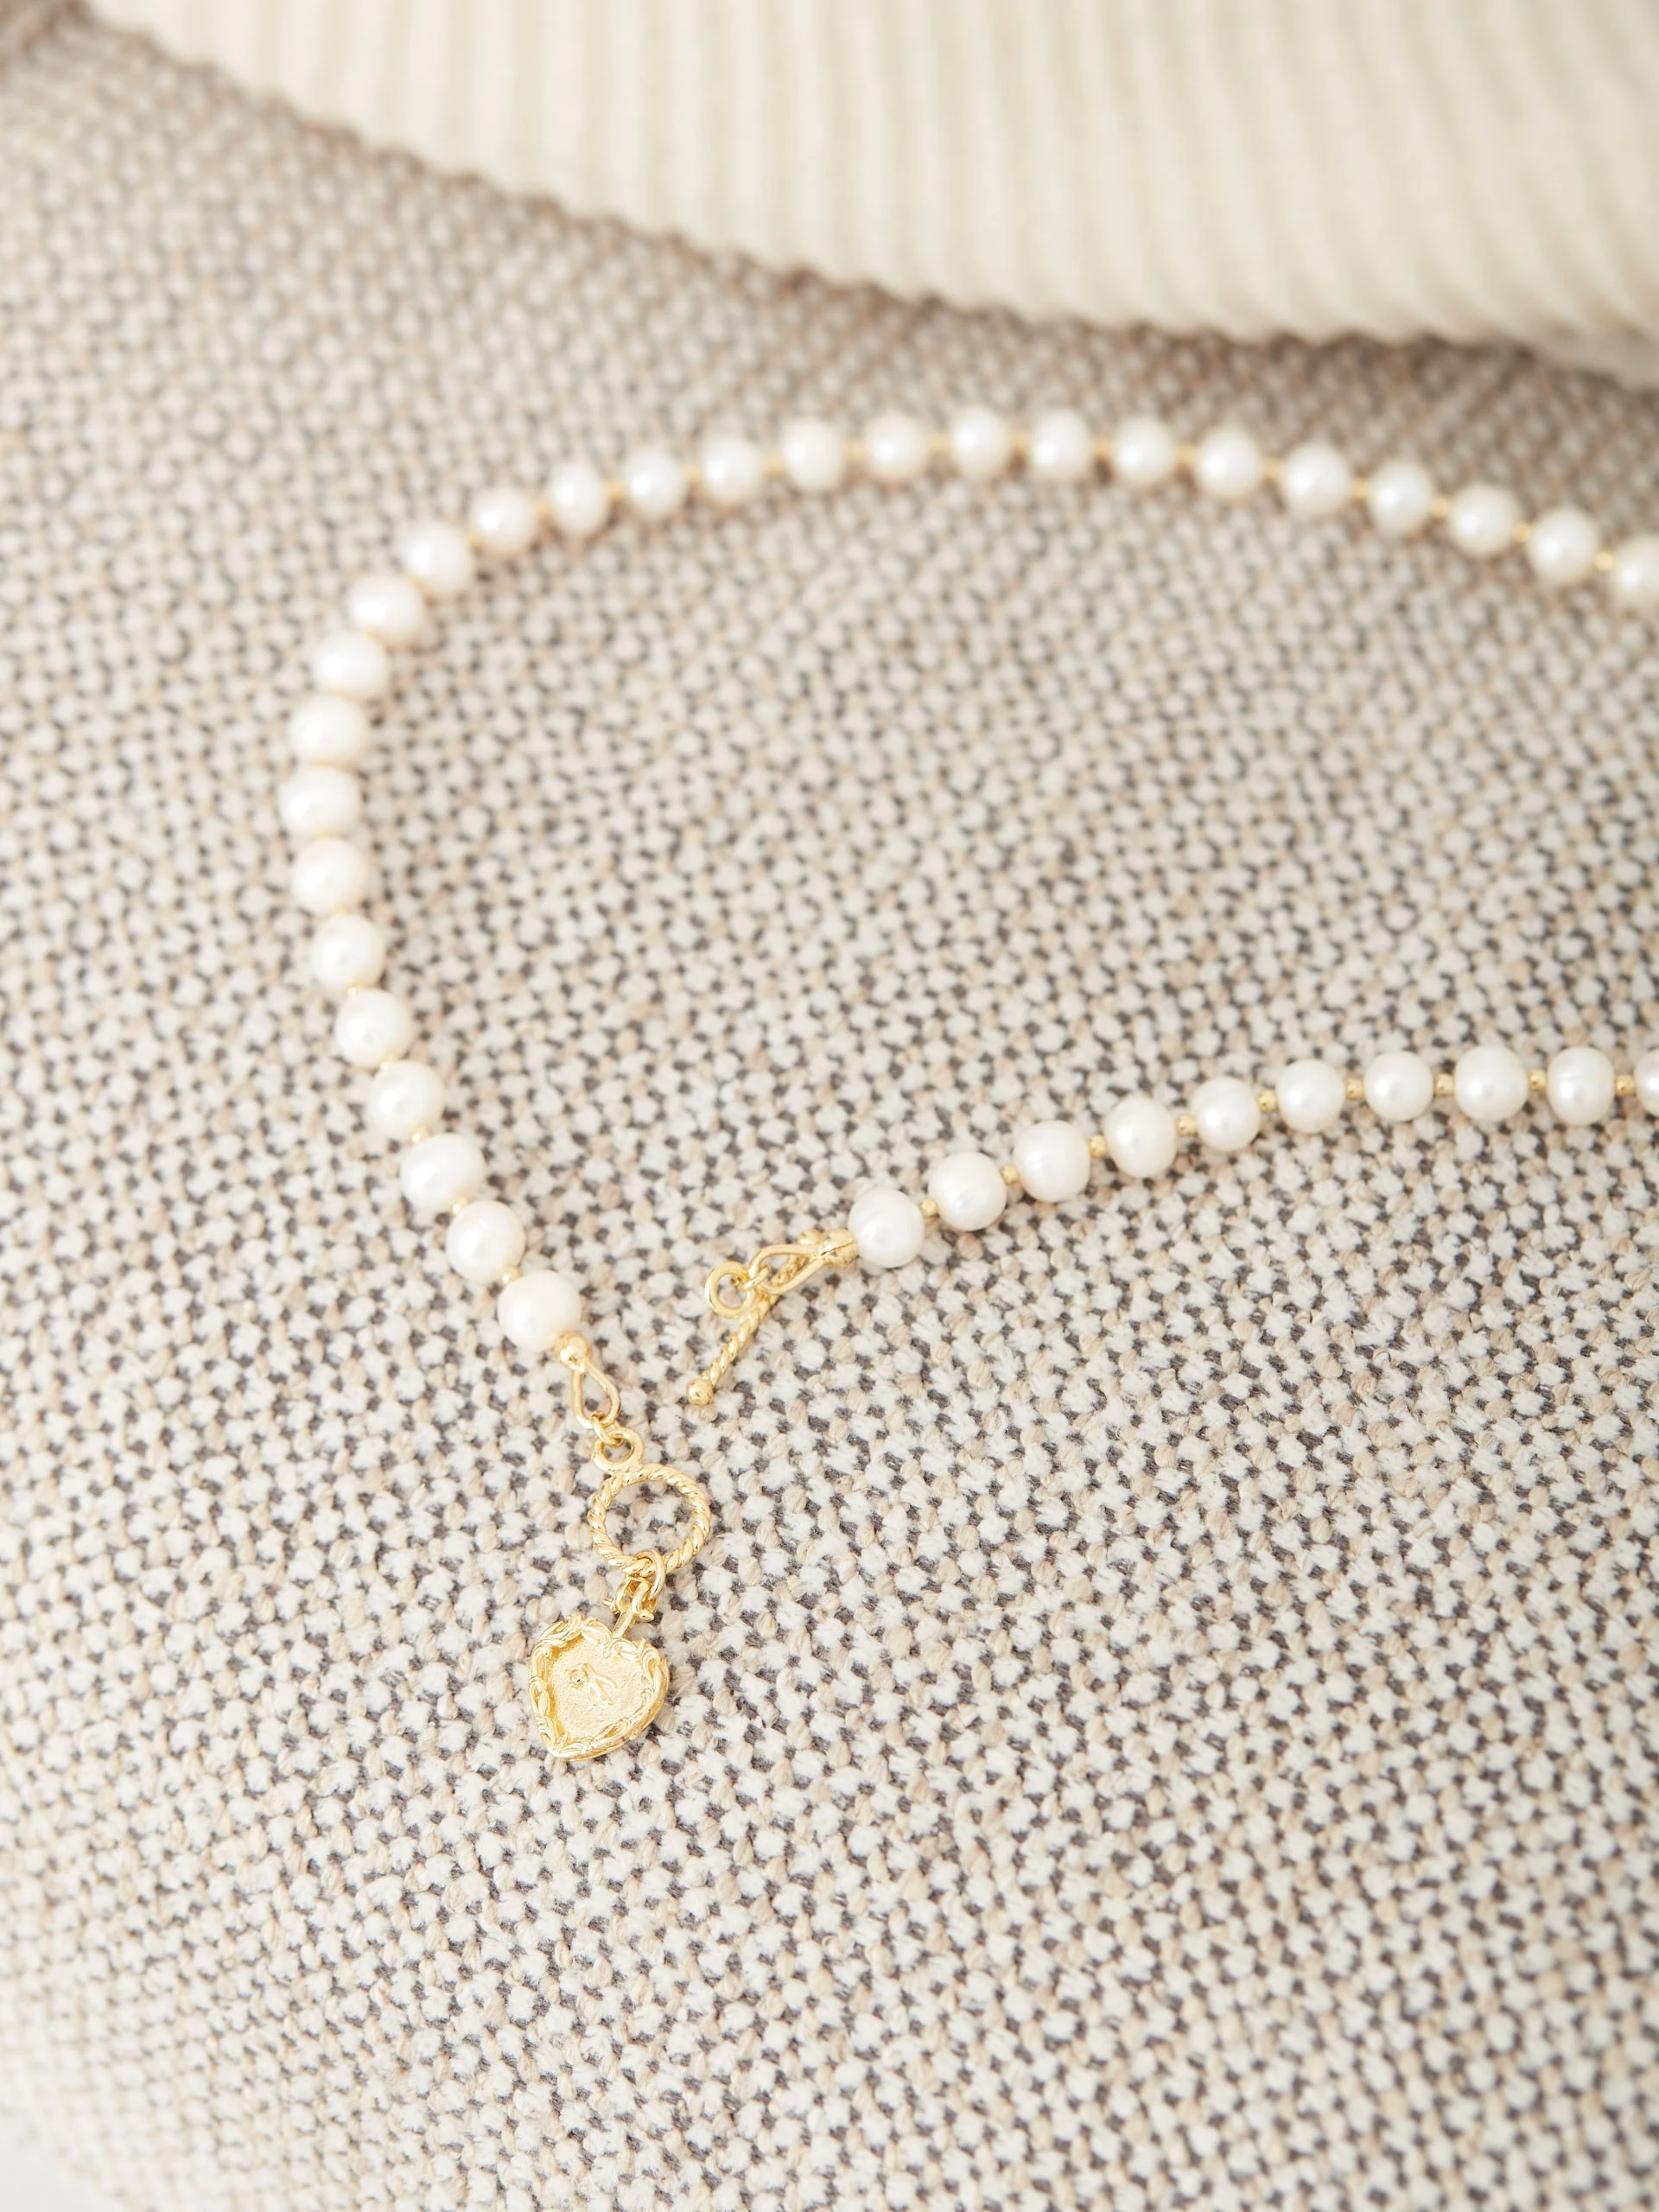 PEARL BRACELET WITH HEART-SHAPED CHARM